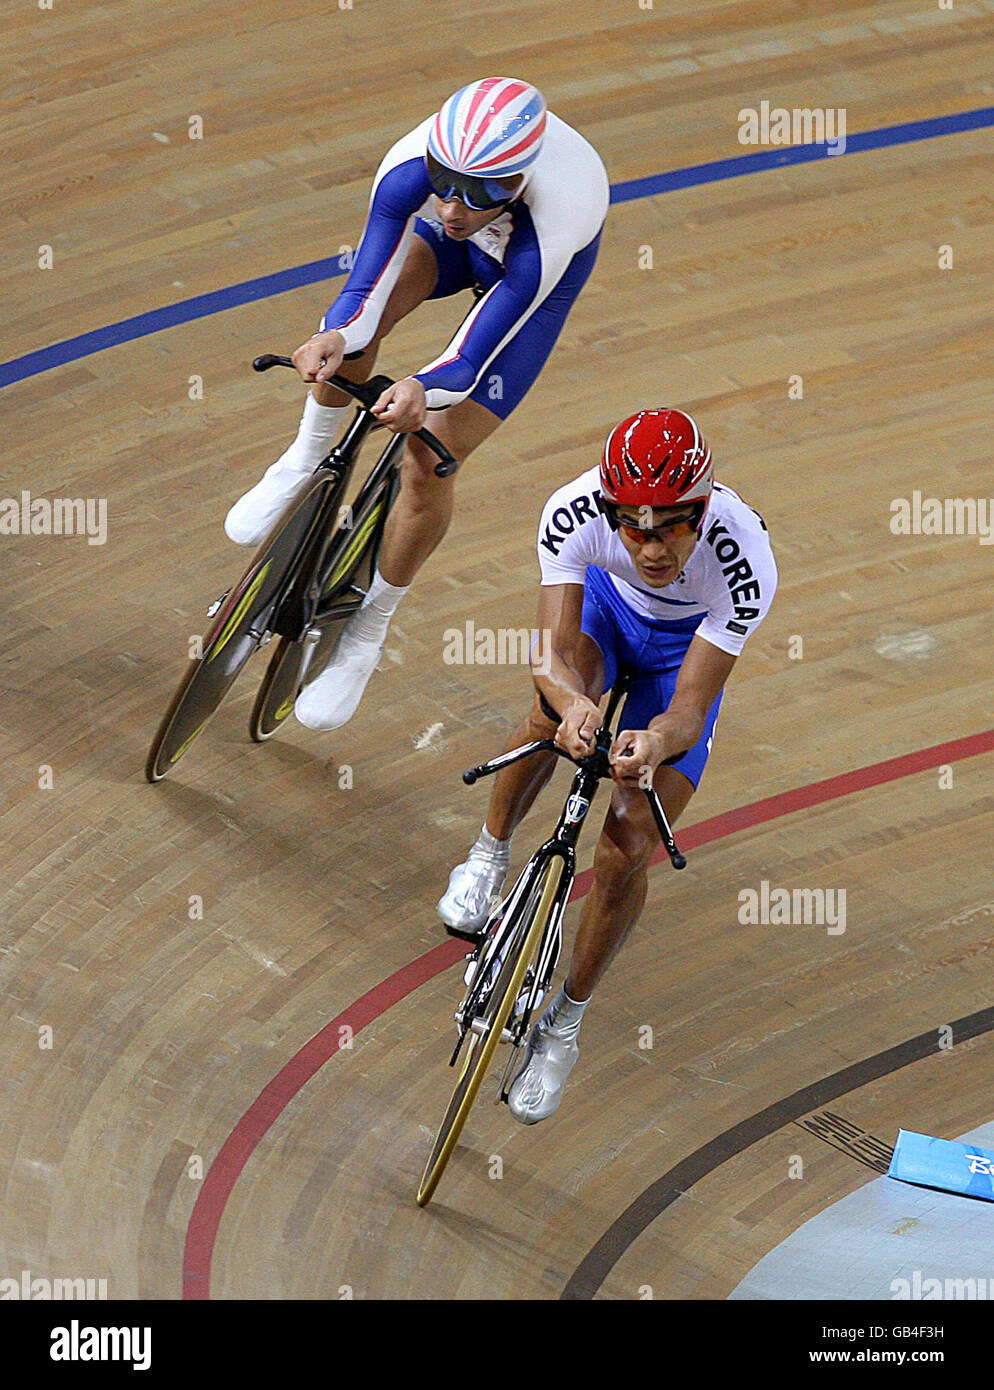 Great Britain's Darren Kenny (behind) catches Jin Yong-Sik of Korea on his way to winning the Men's Individual Pursuit in the Laoshan Velodrome during the 2008 Beijing Paralympic Games, China. Stock Photo